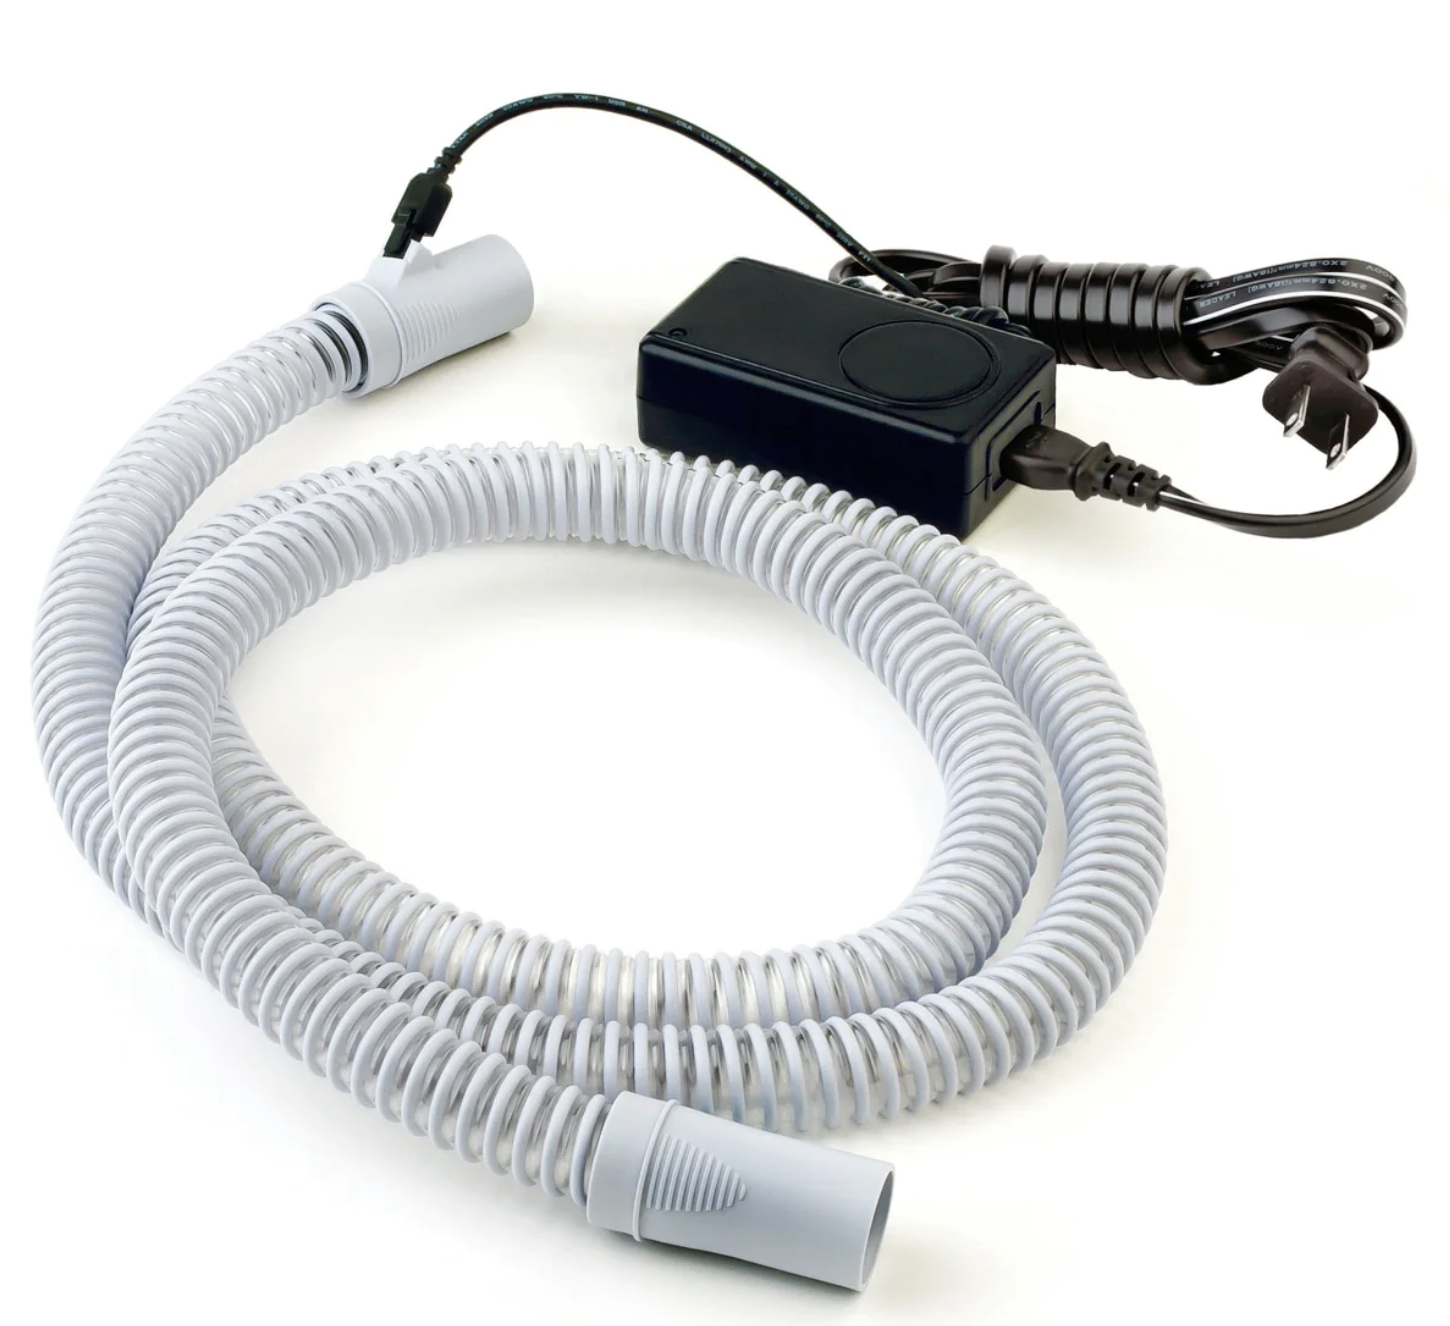 Product Image React Luna G2 Heated Tubing w/ Power Supply